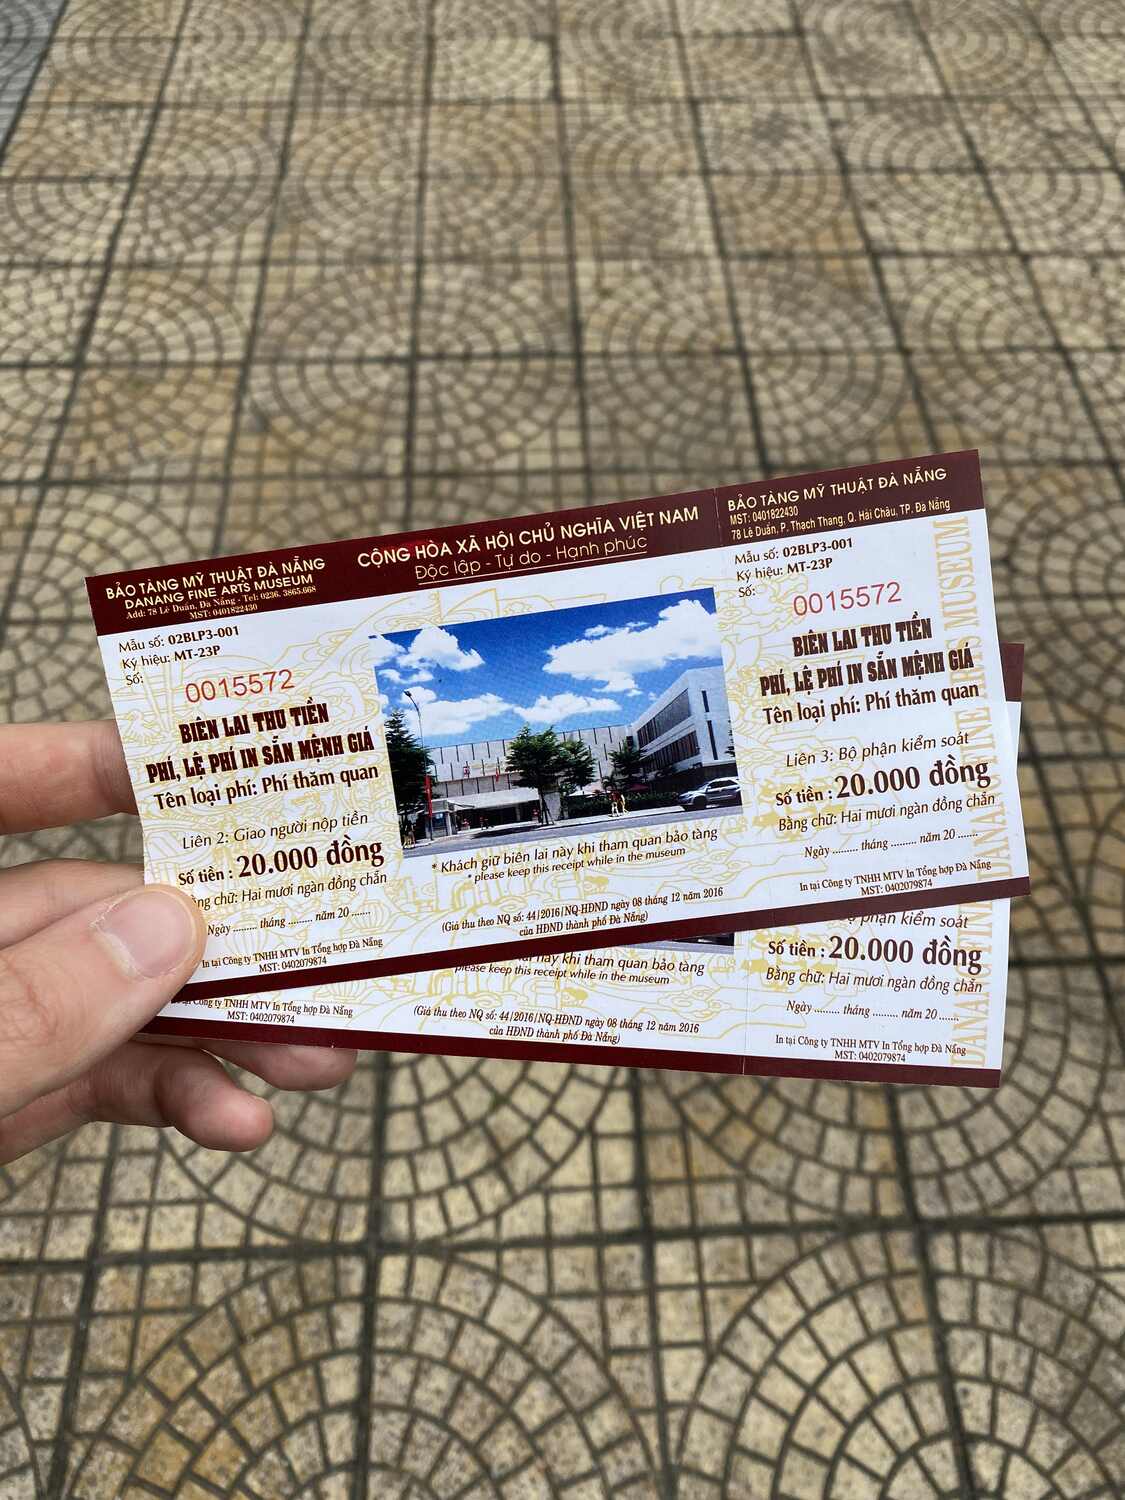 Official tickets to the Da Nang Fine Arts Museum